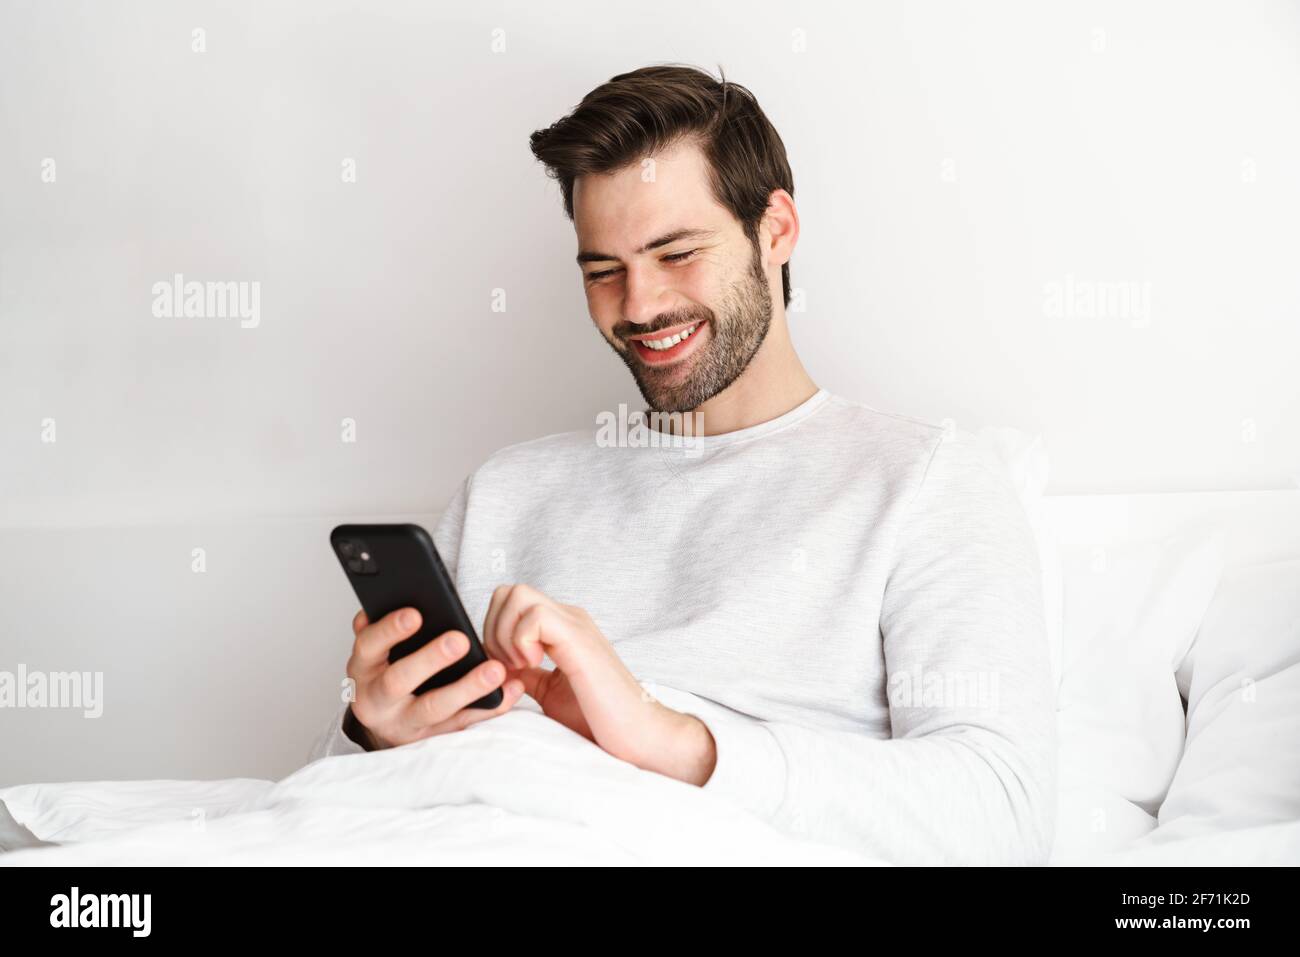 Smiling young man using mobile phone while resting in bed at home Stock Photo